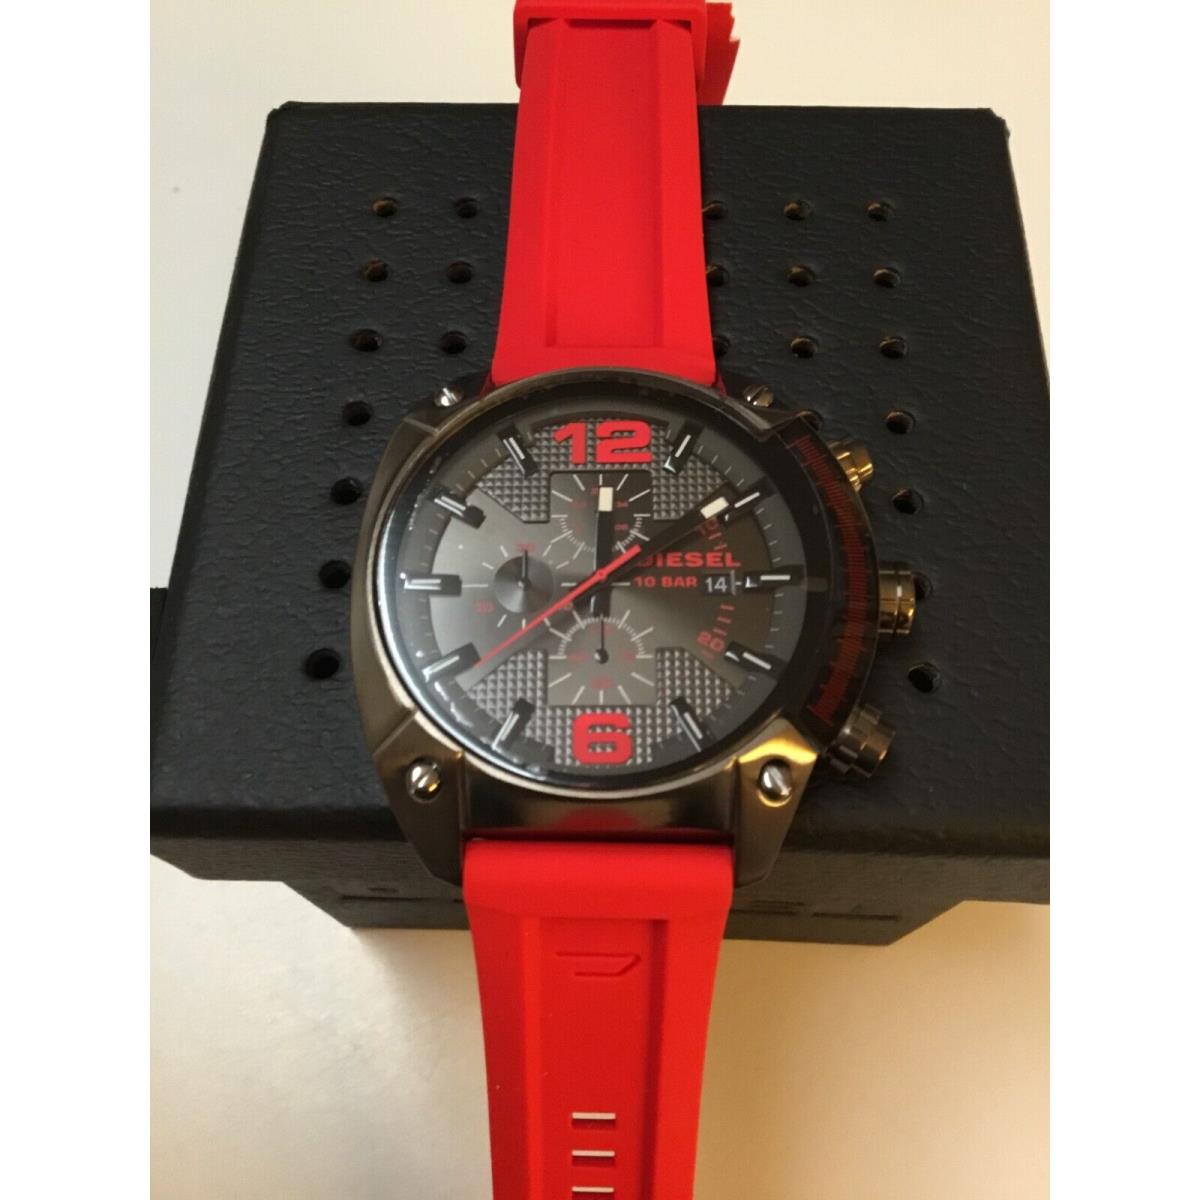 Diesel Overflow Mens Chronograph Watch with Red Band Model DZ4481